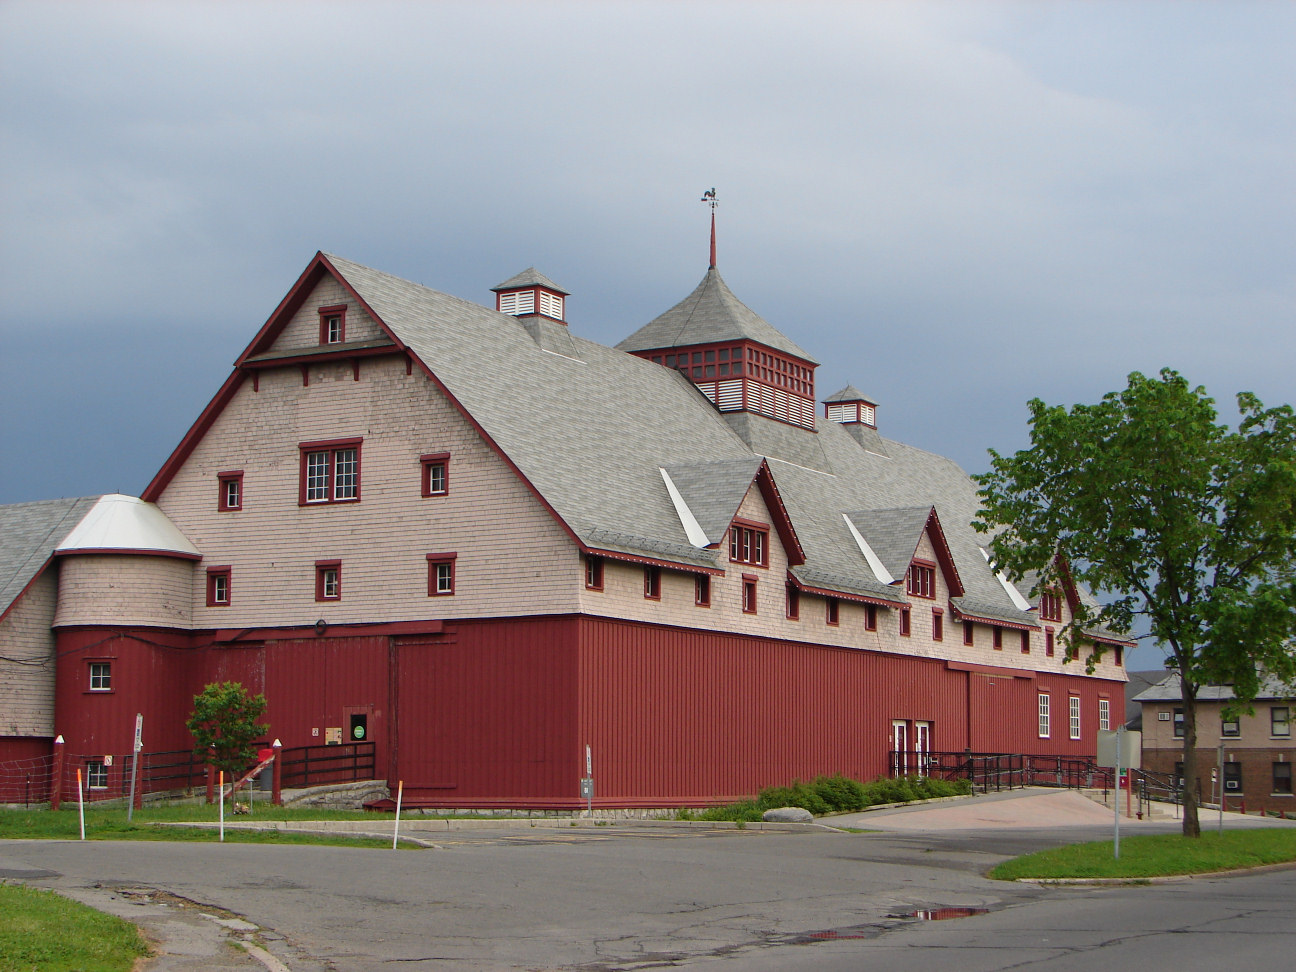 exterior of agricultural museum which looks like a farm